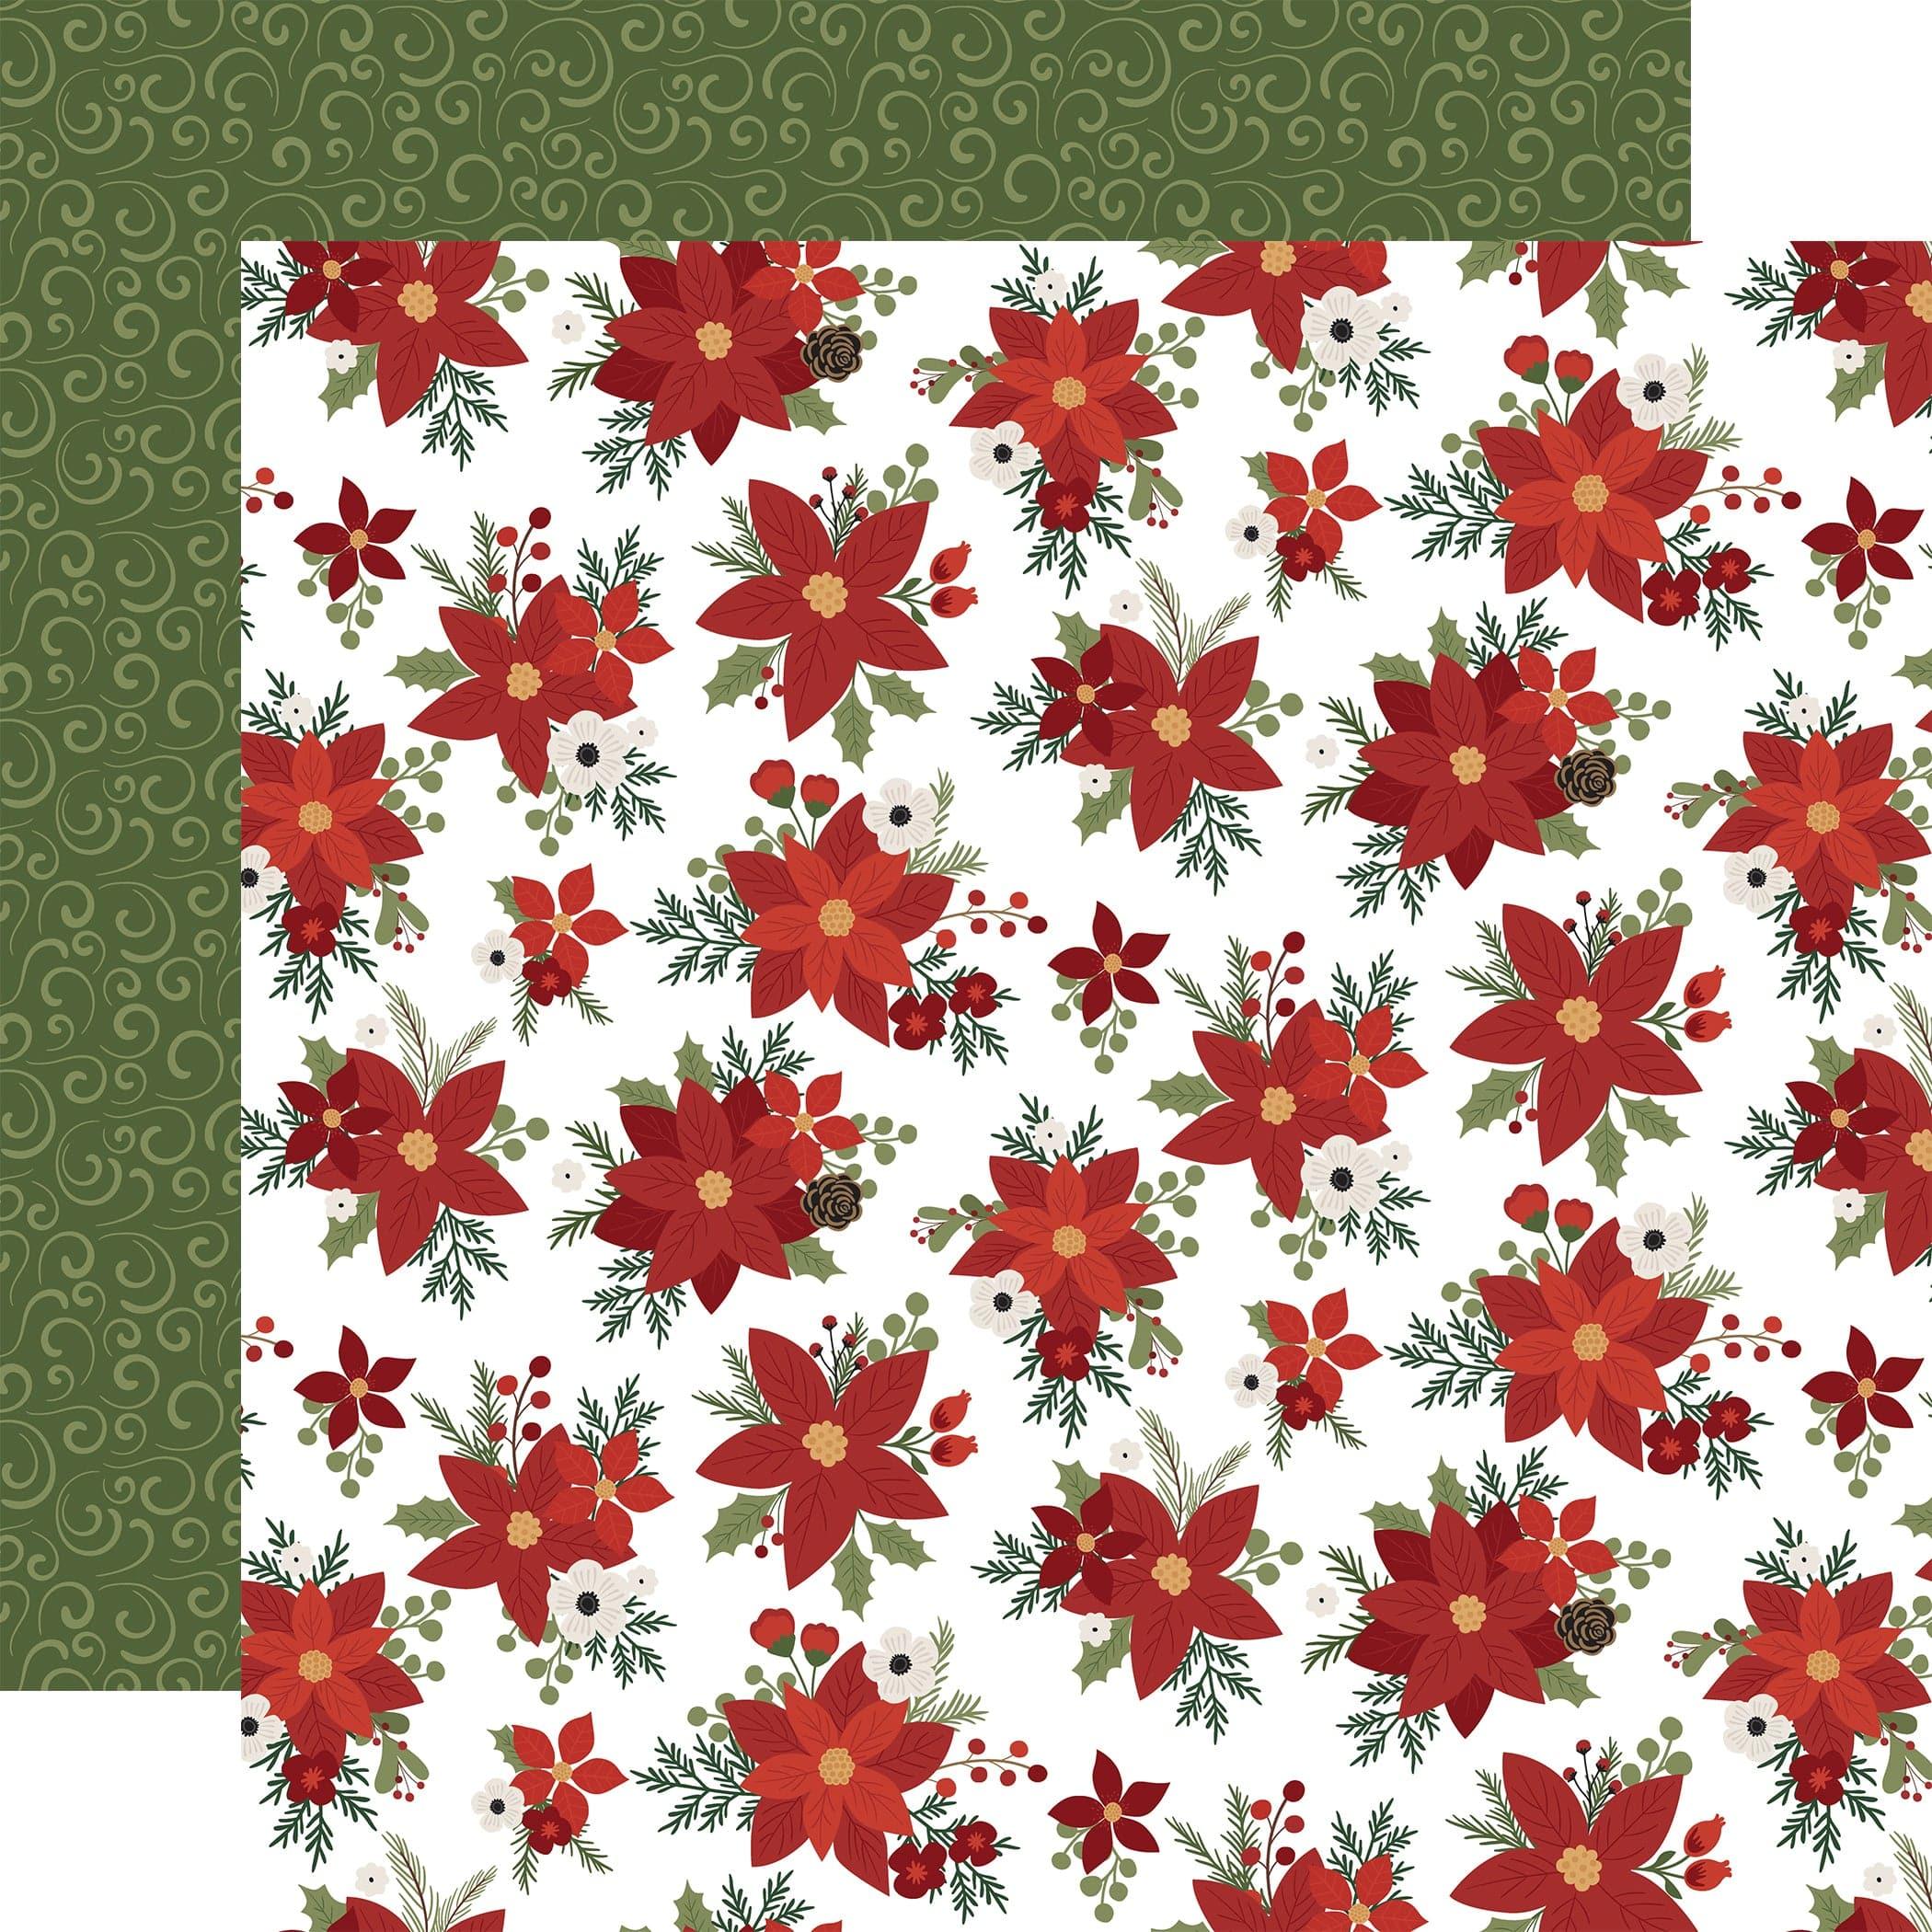 Gnome For Christmas Collection Santa's Poinsettias 12 x 12 Double-Sided Scrapbook Paper by Echo Park Paper - Scrapbook Supply Companies